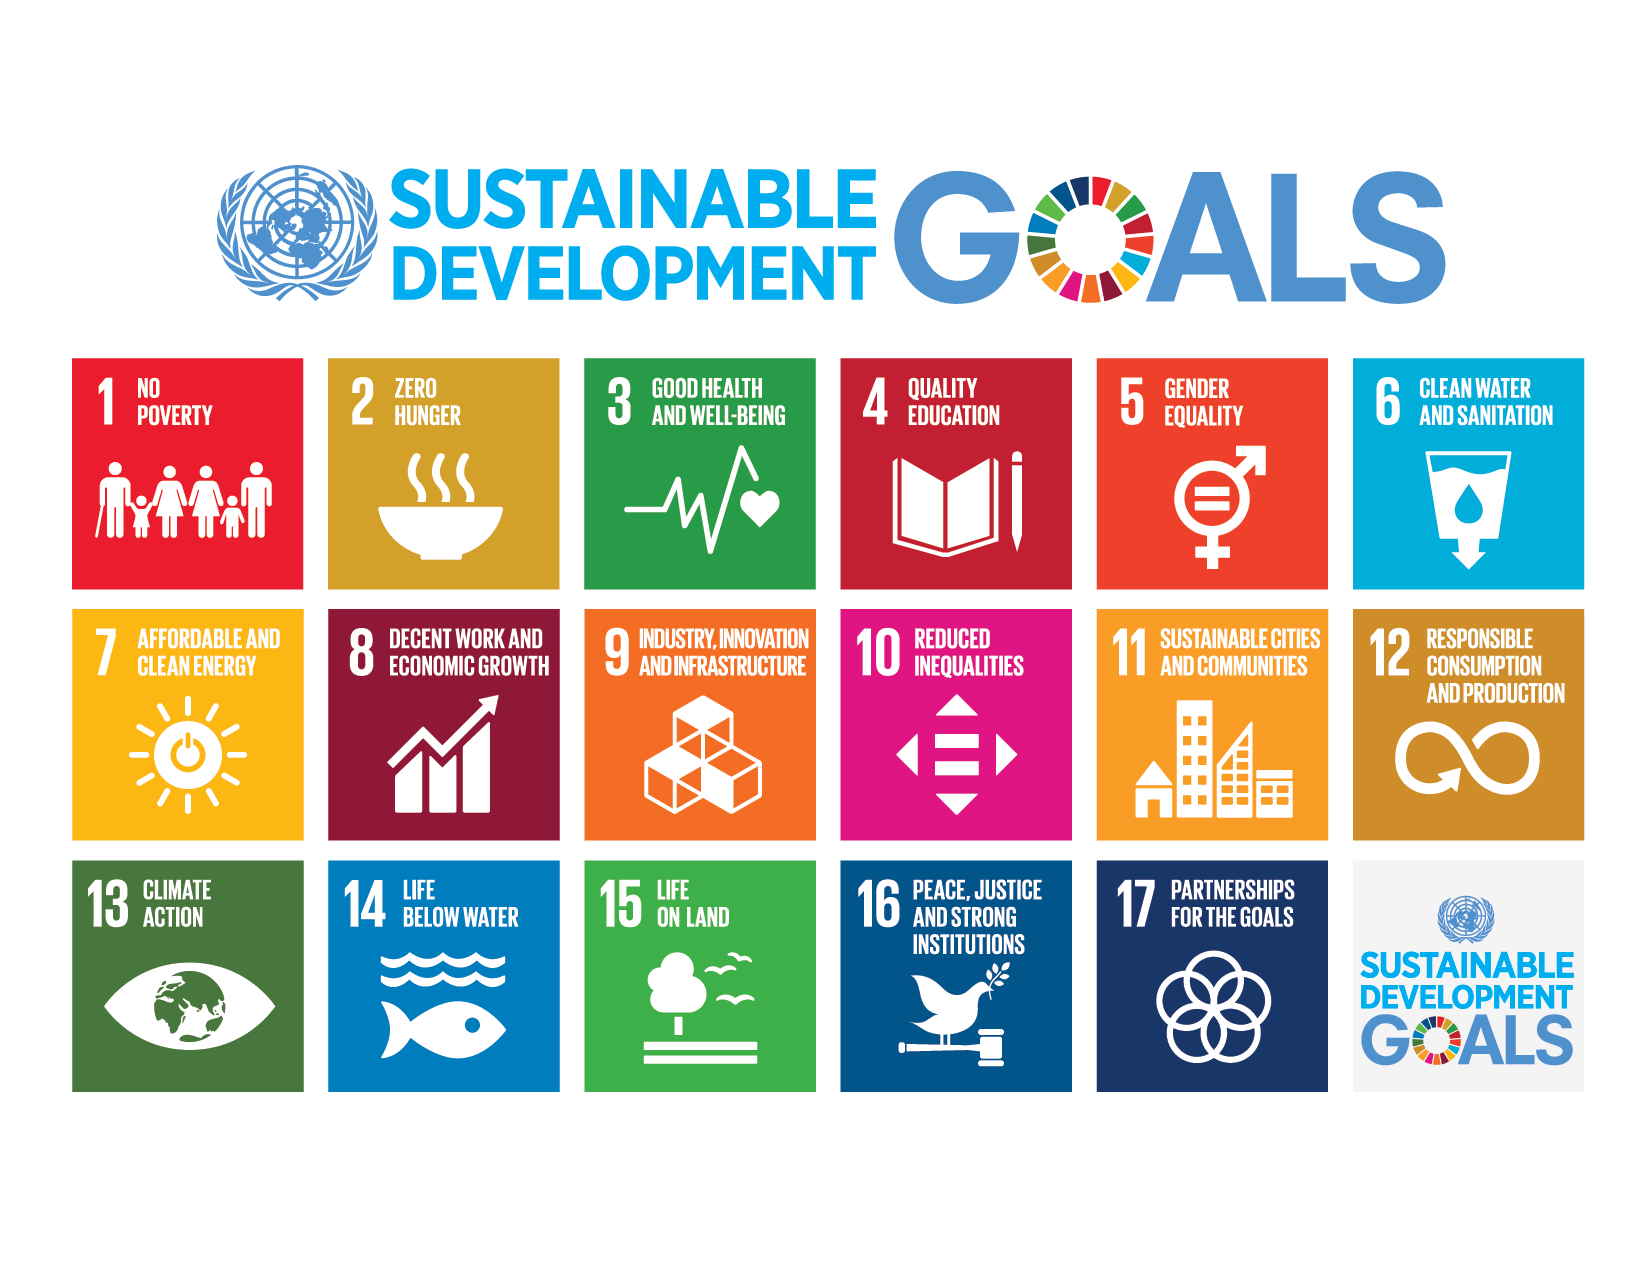 After learning basis of SDGs cover image